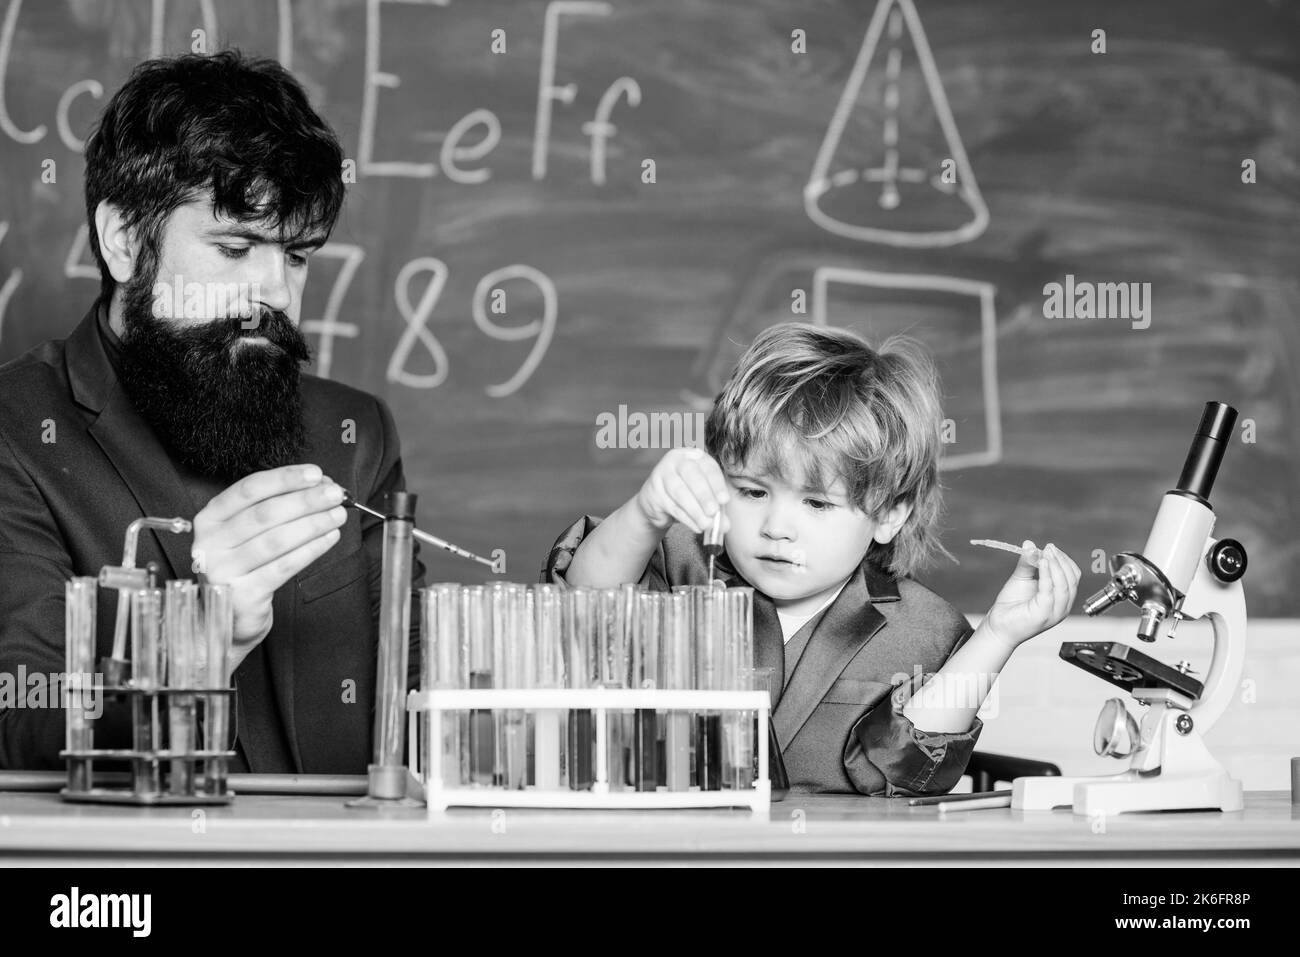 biology and chemistry education. father and son at school. Educational concept. Back to school. teacher man with little boy. School education. Dream Stock Photo